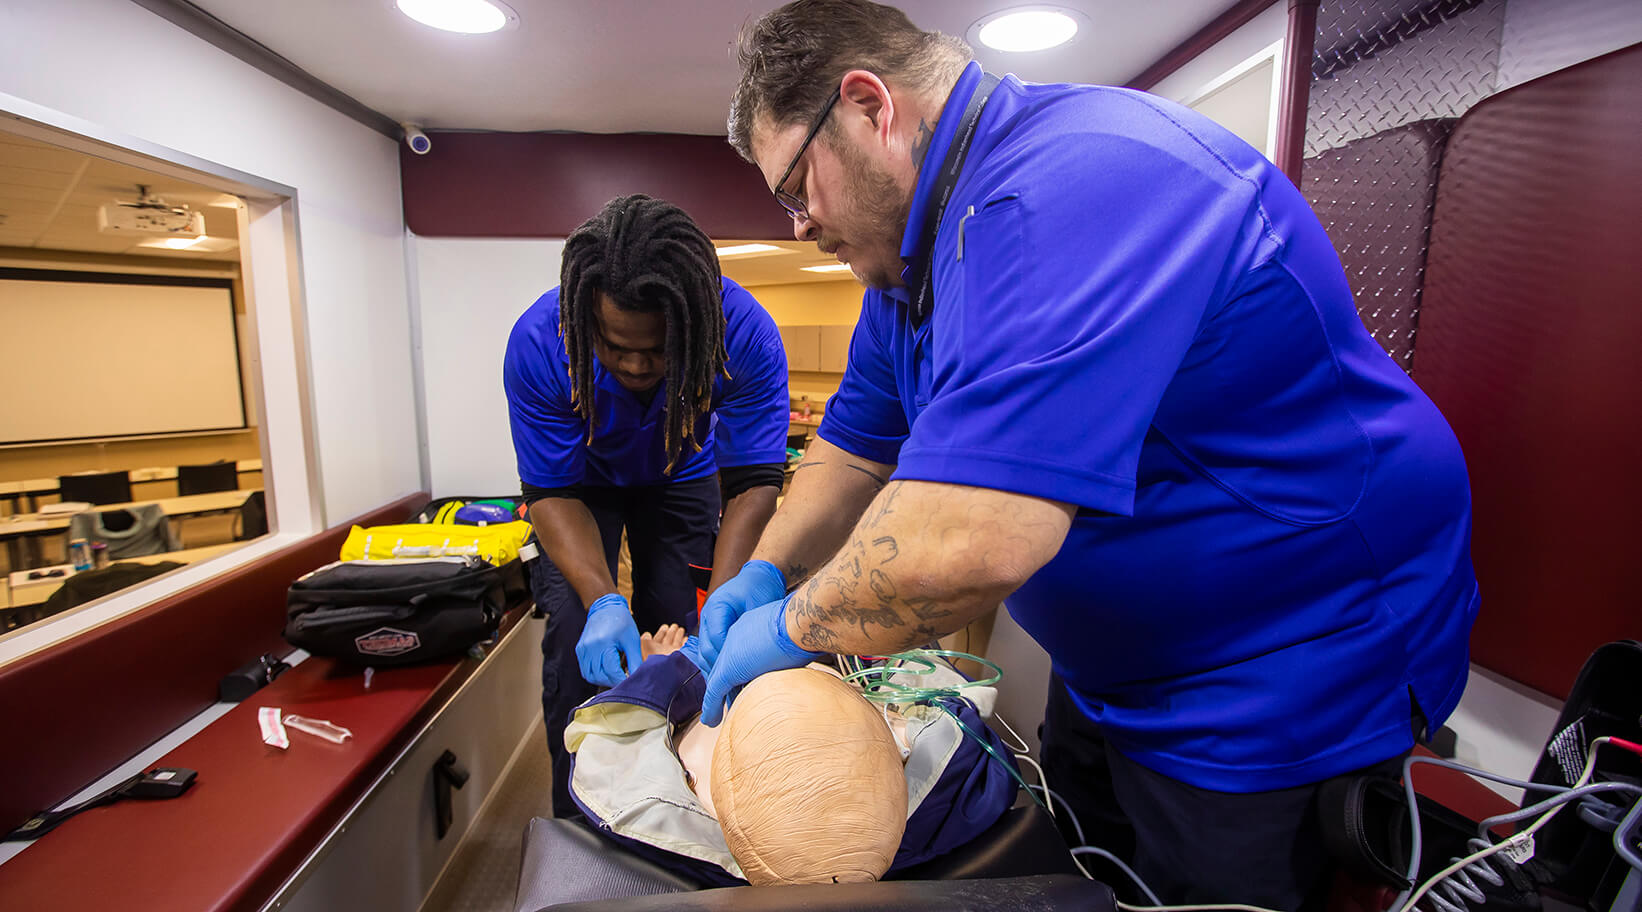 EMT students doing hands-on work with a simulated person